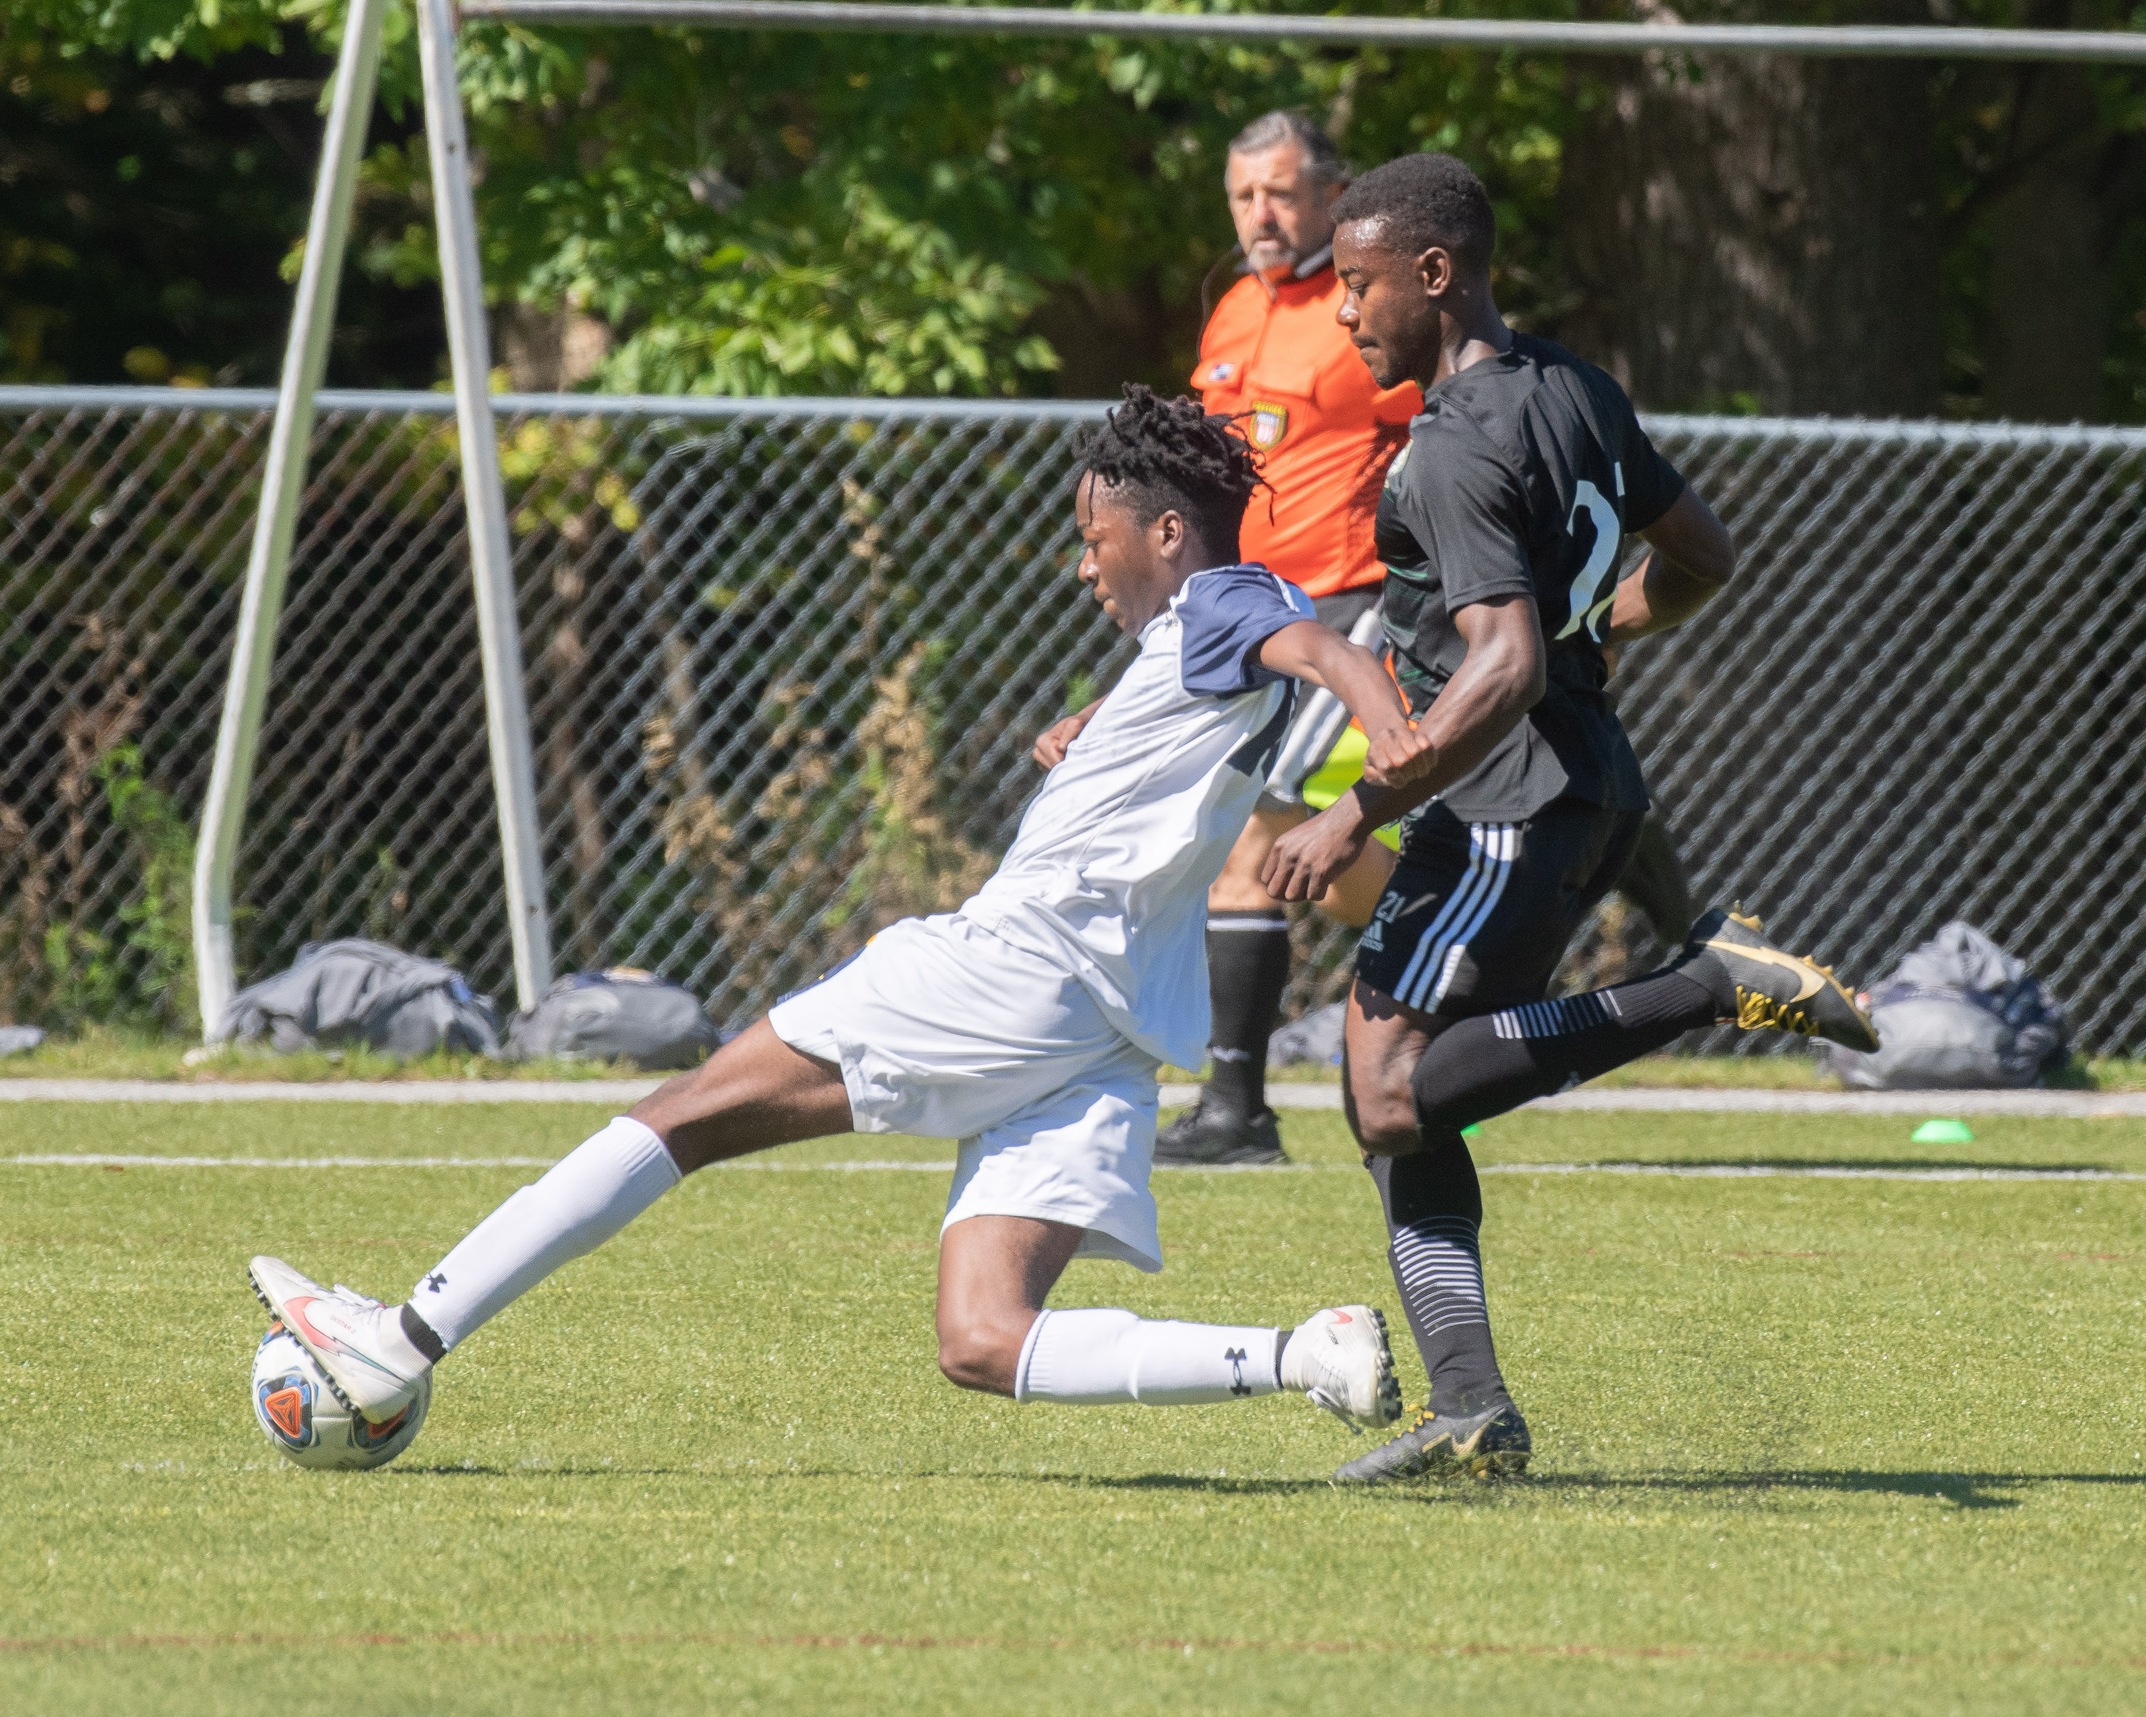 Men's Soccer blanked by Rams 1-0 in MASCAC action